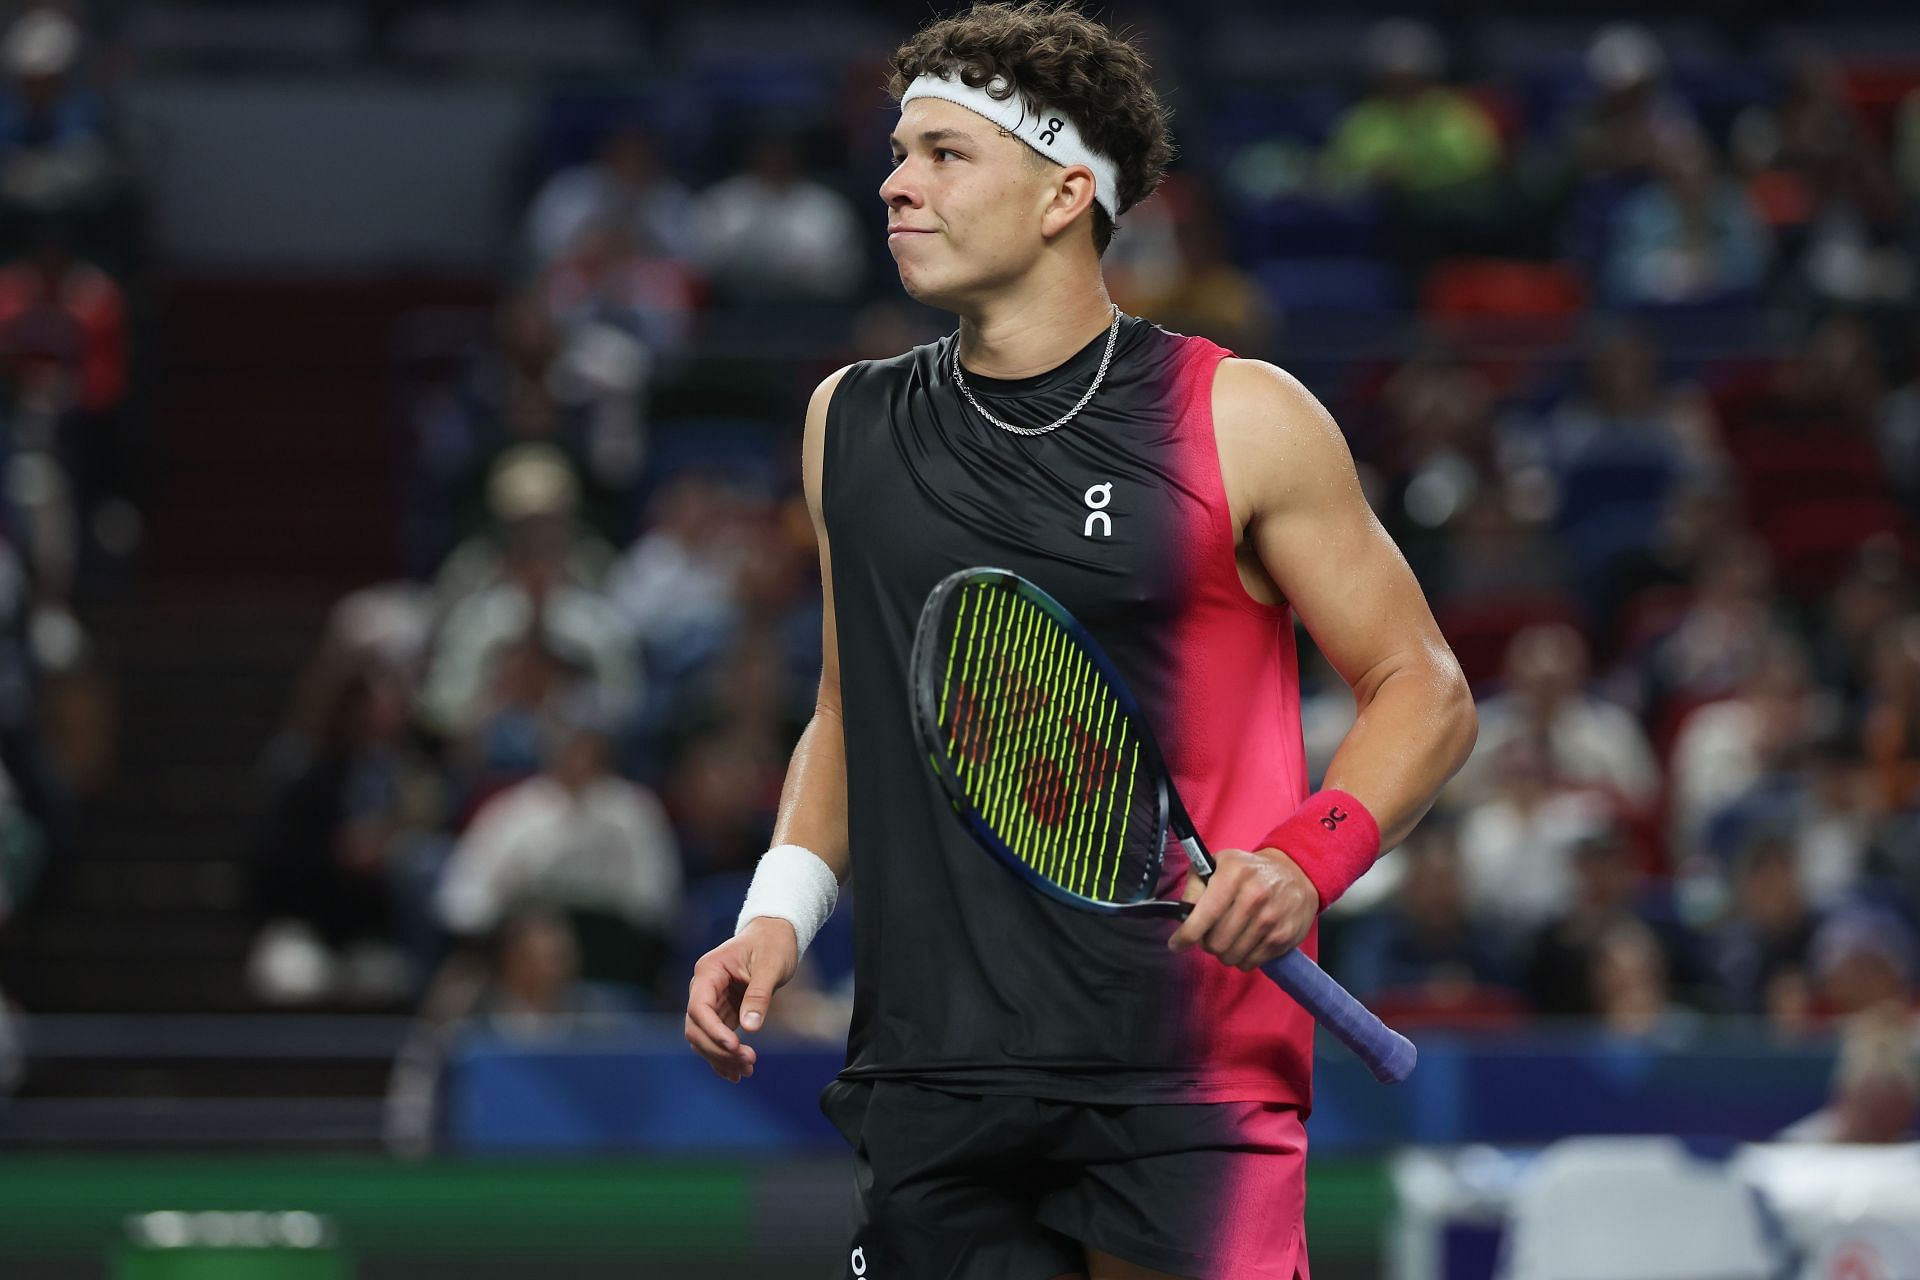 Ben Shelton at the 2023 Shanghai Rolex Masters